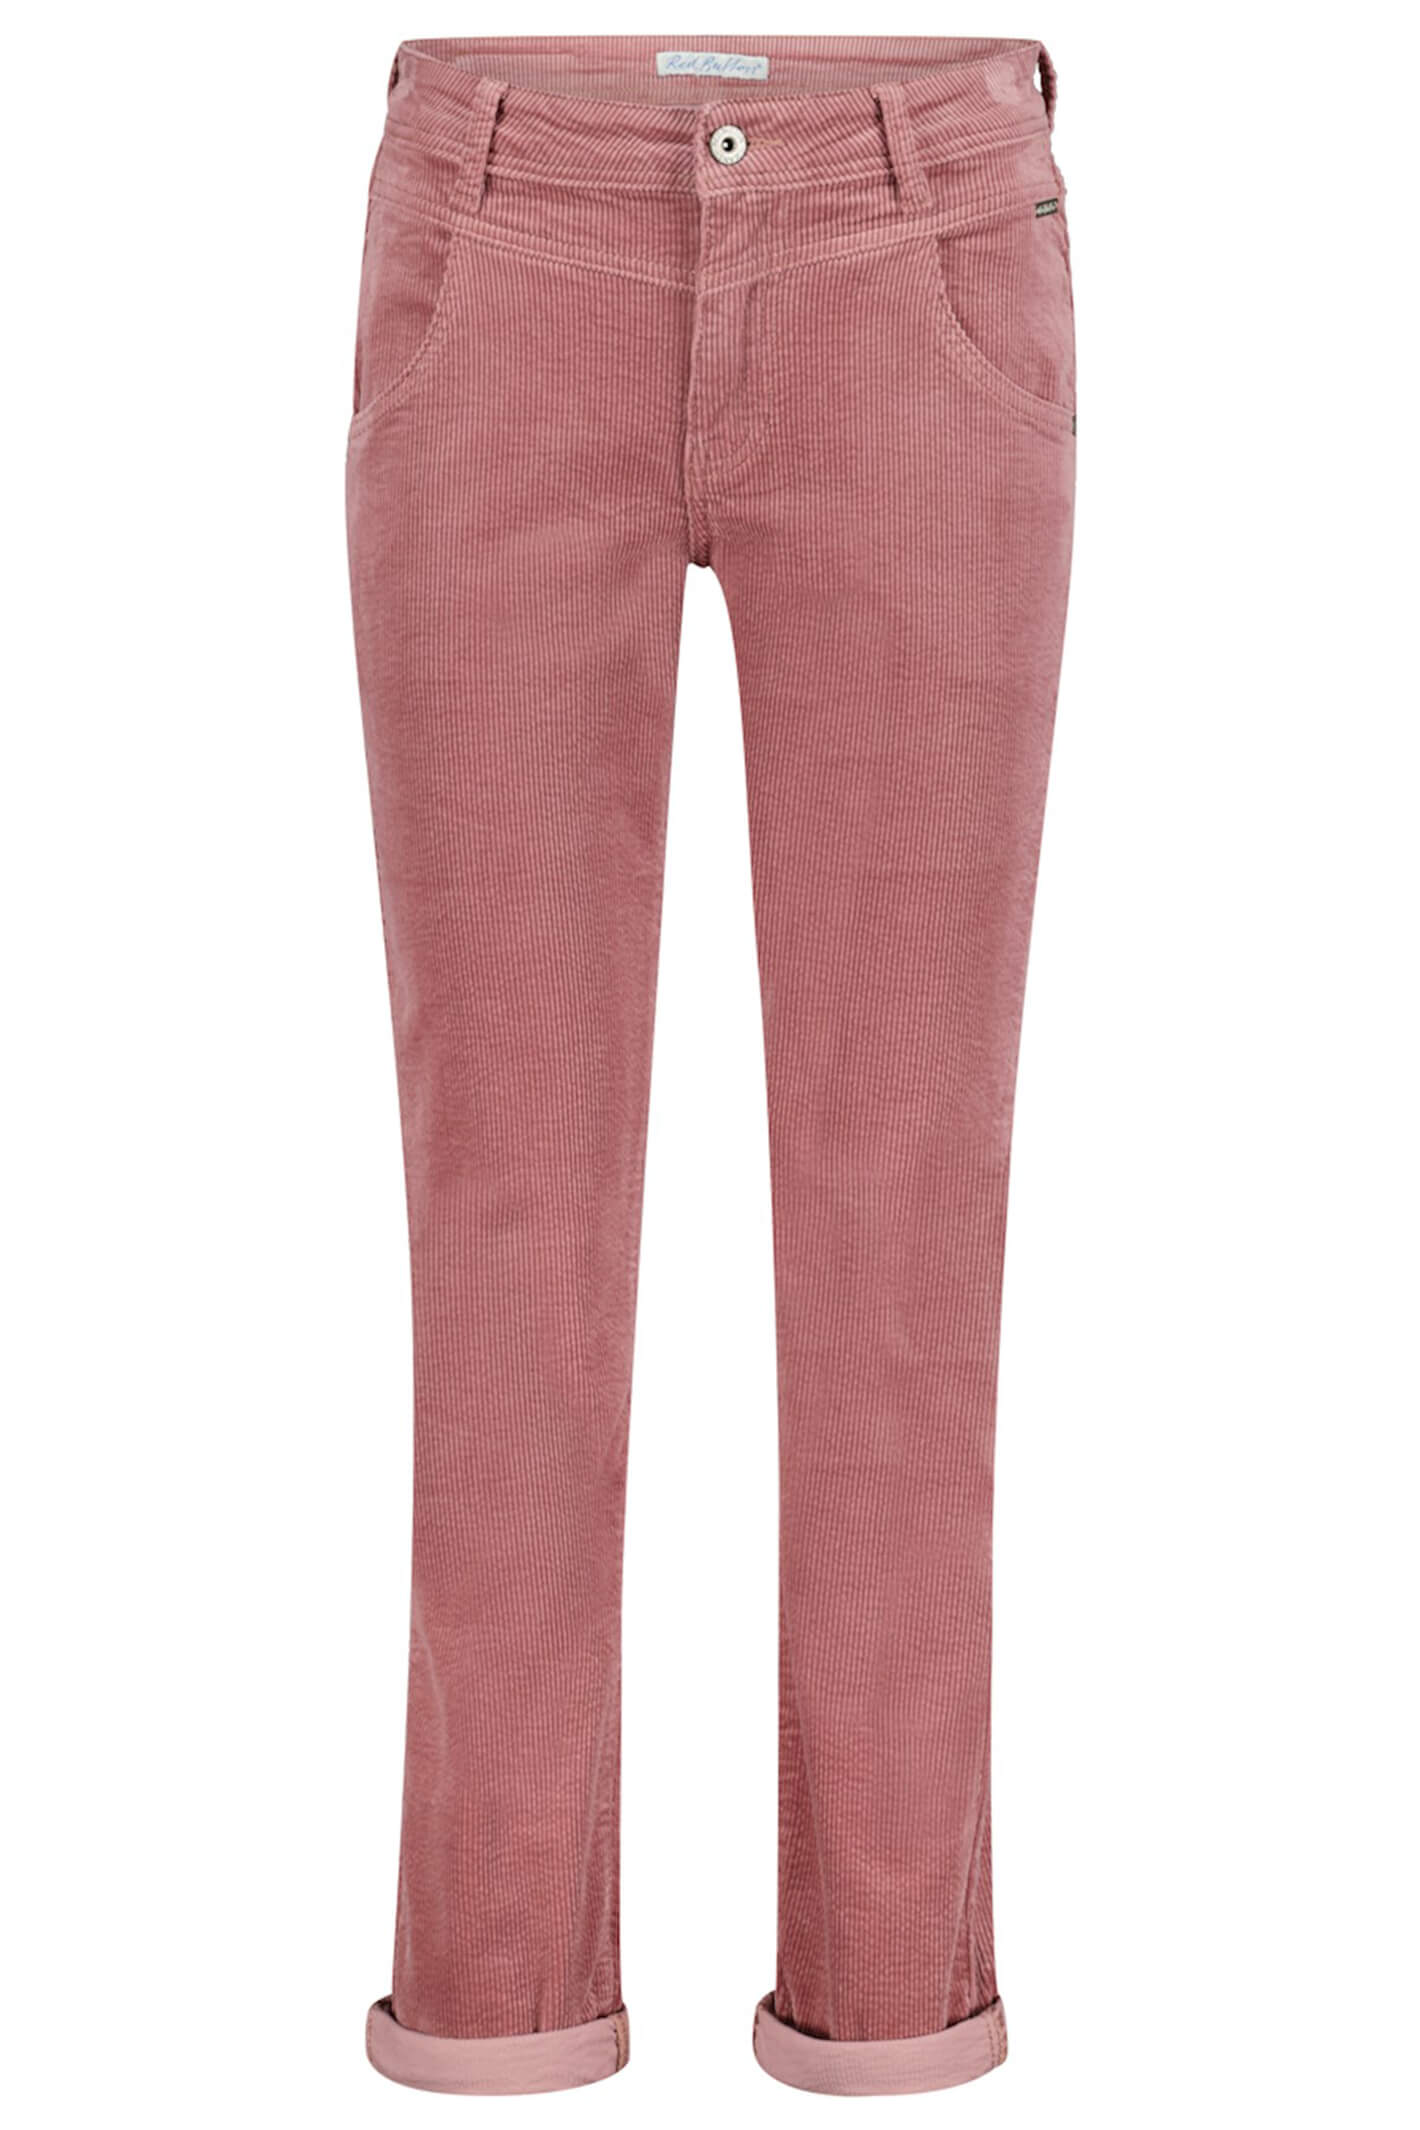 Perfect Fit Cord Trousers - Trousers - Damart.co.uk